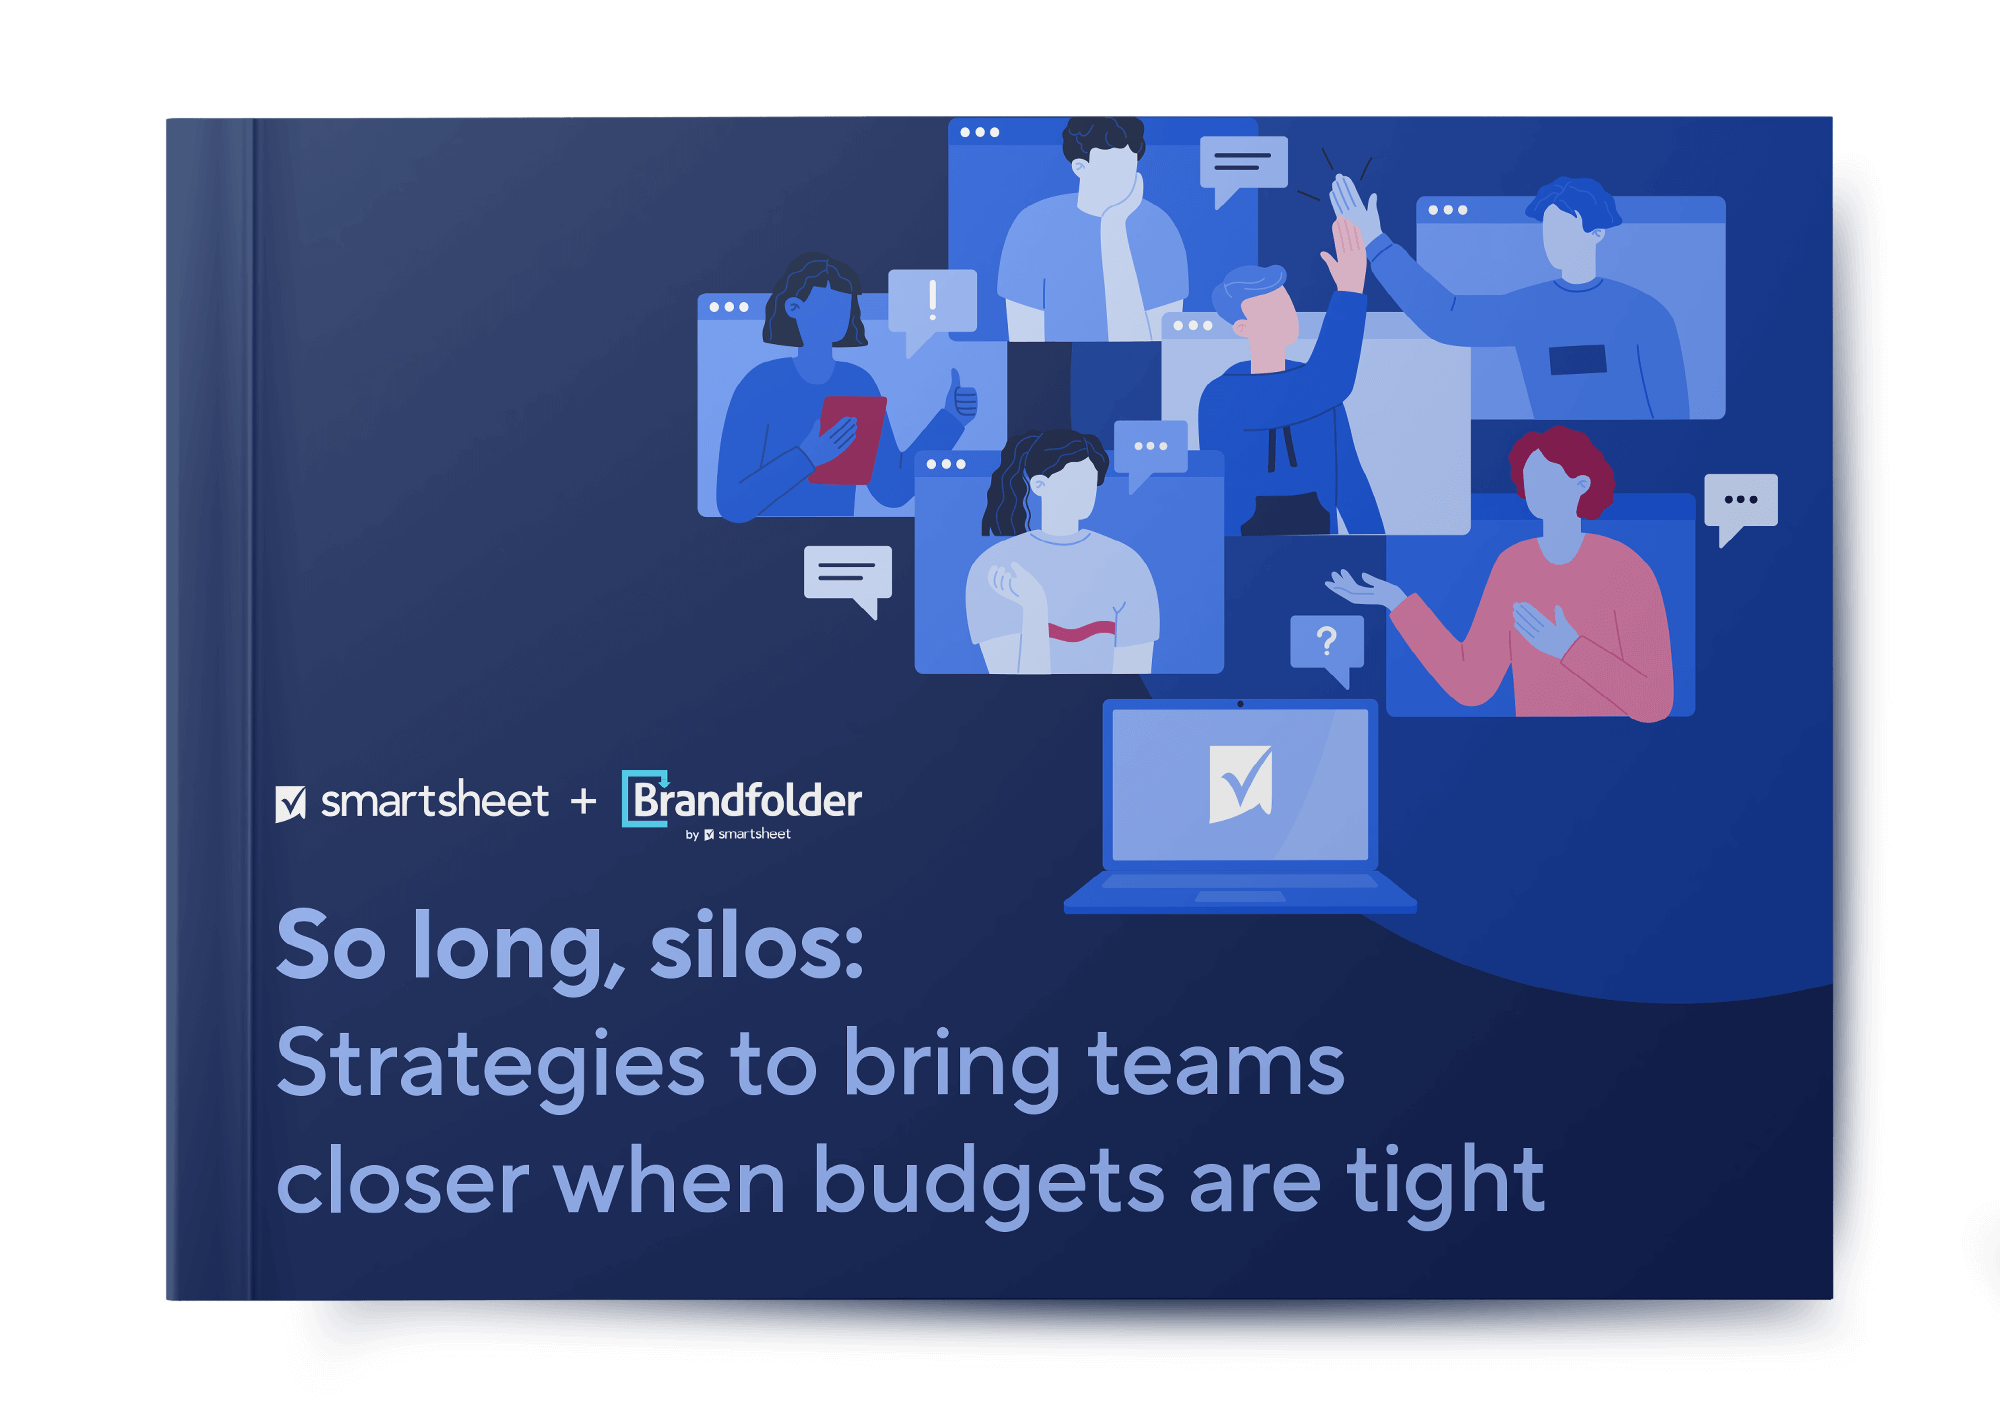 So long, silos: Strategies to bring teams closer when budgets are tight